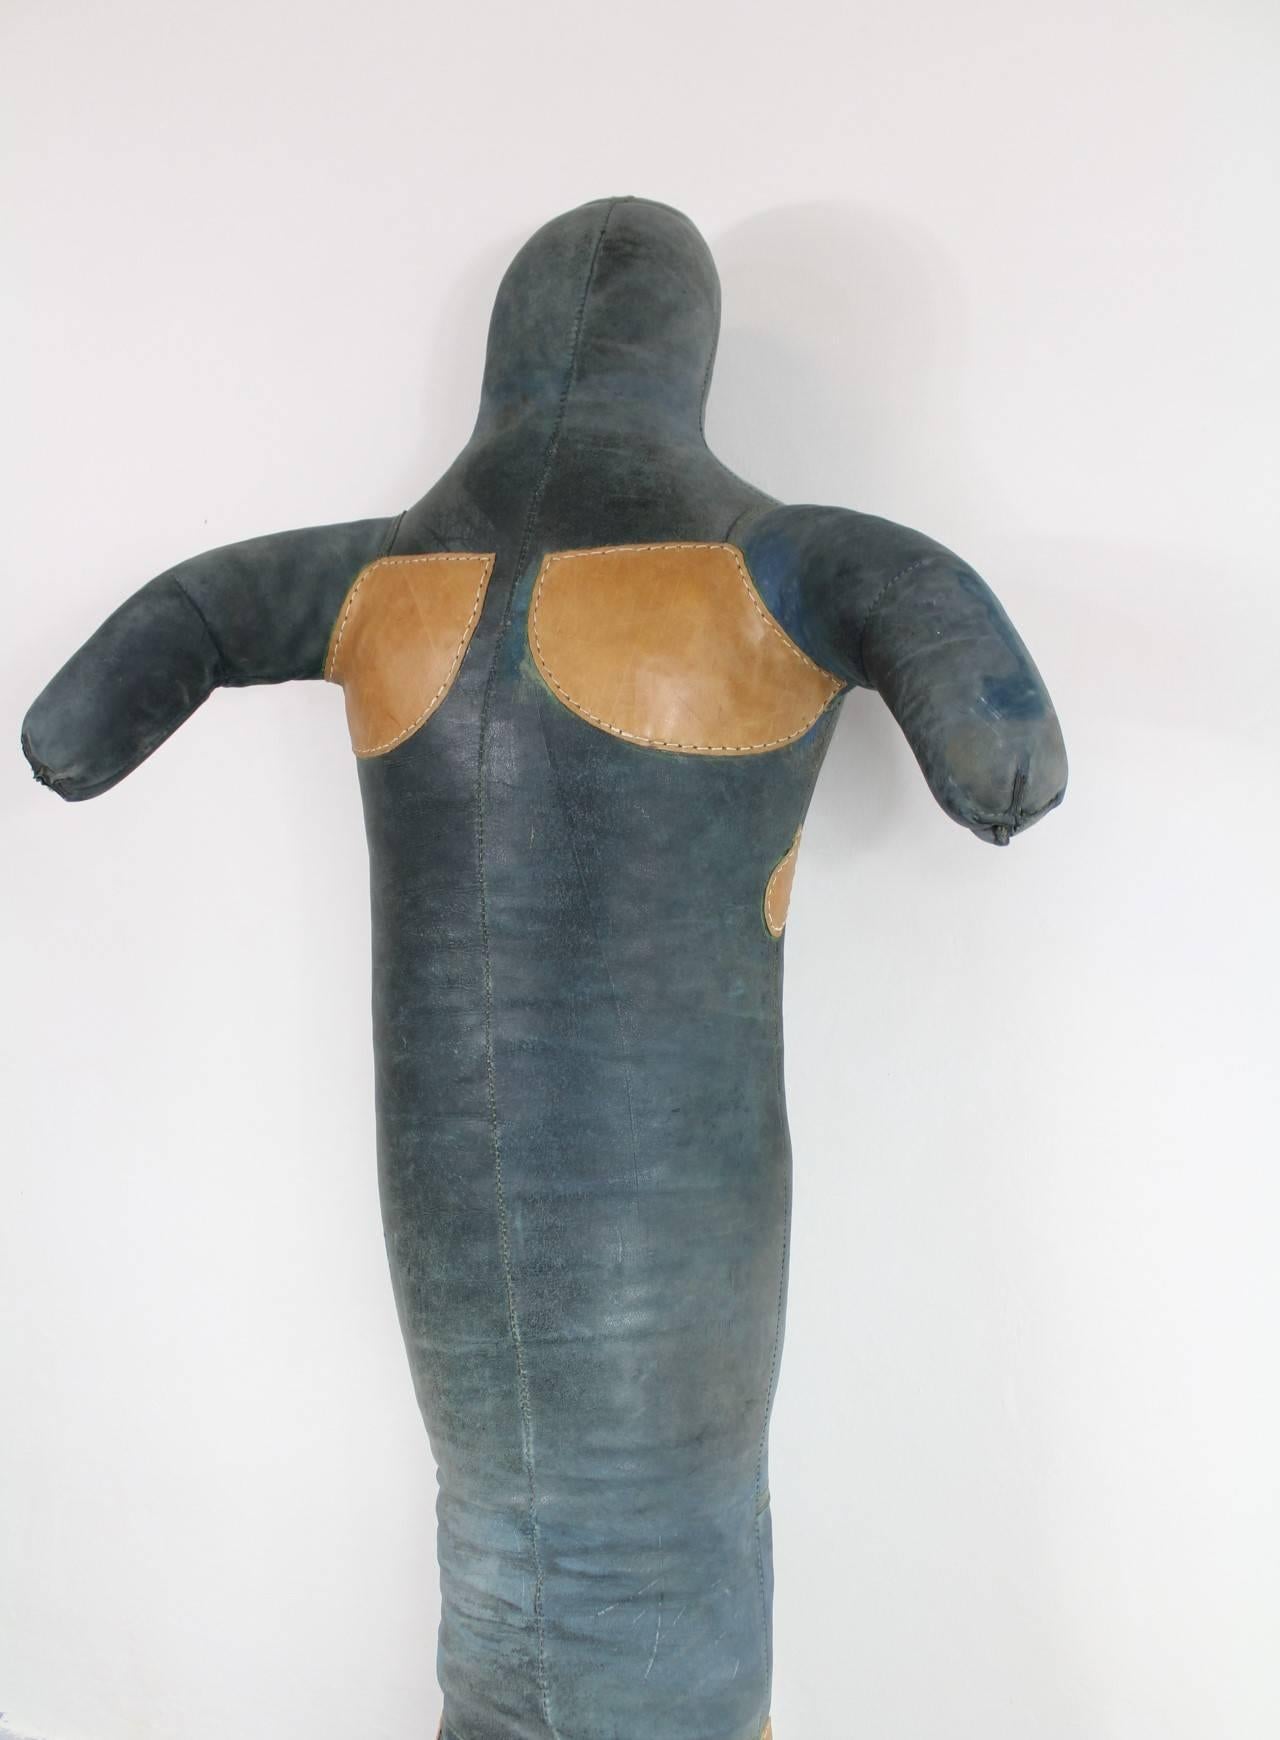 Industrial 1960s Lifesize Leather Wrestling Dummy, Russia